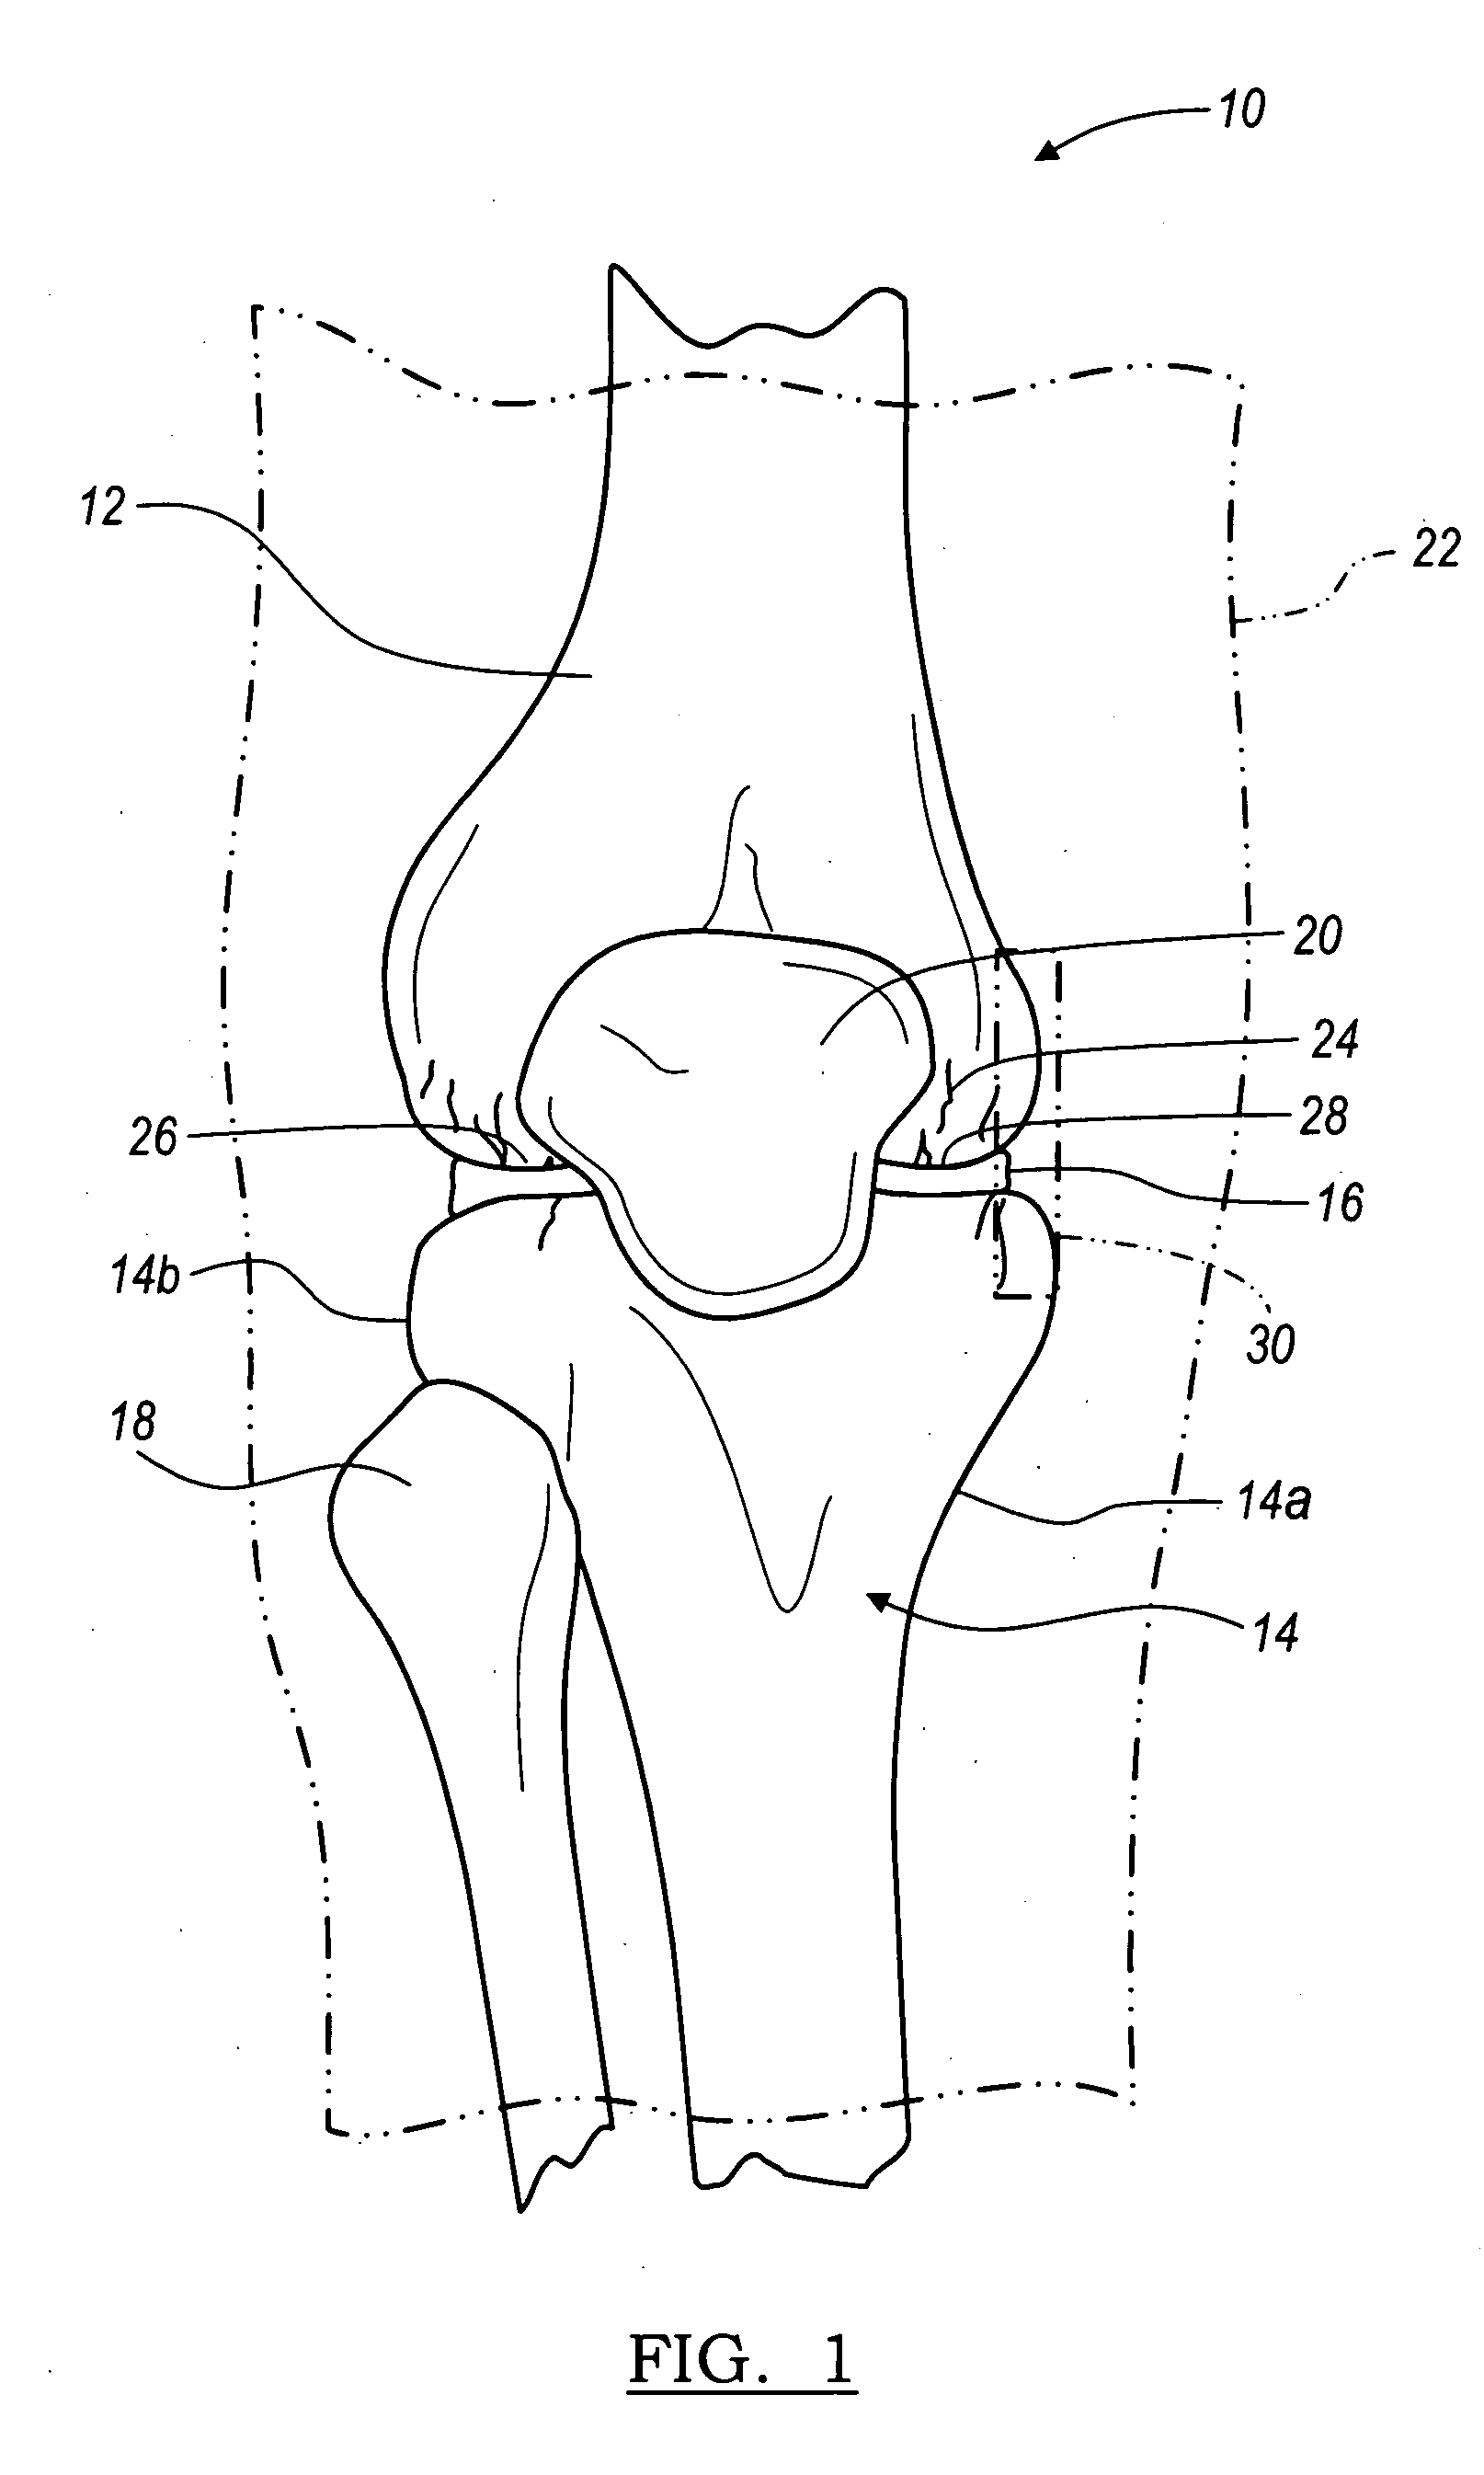 Instrumentation for knee resection